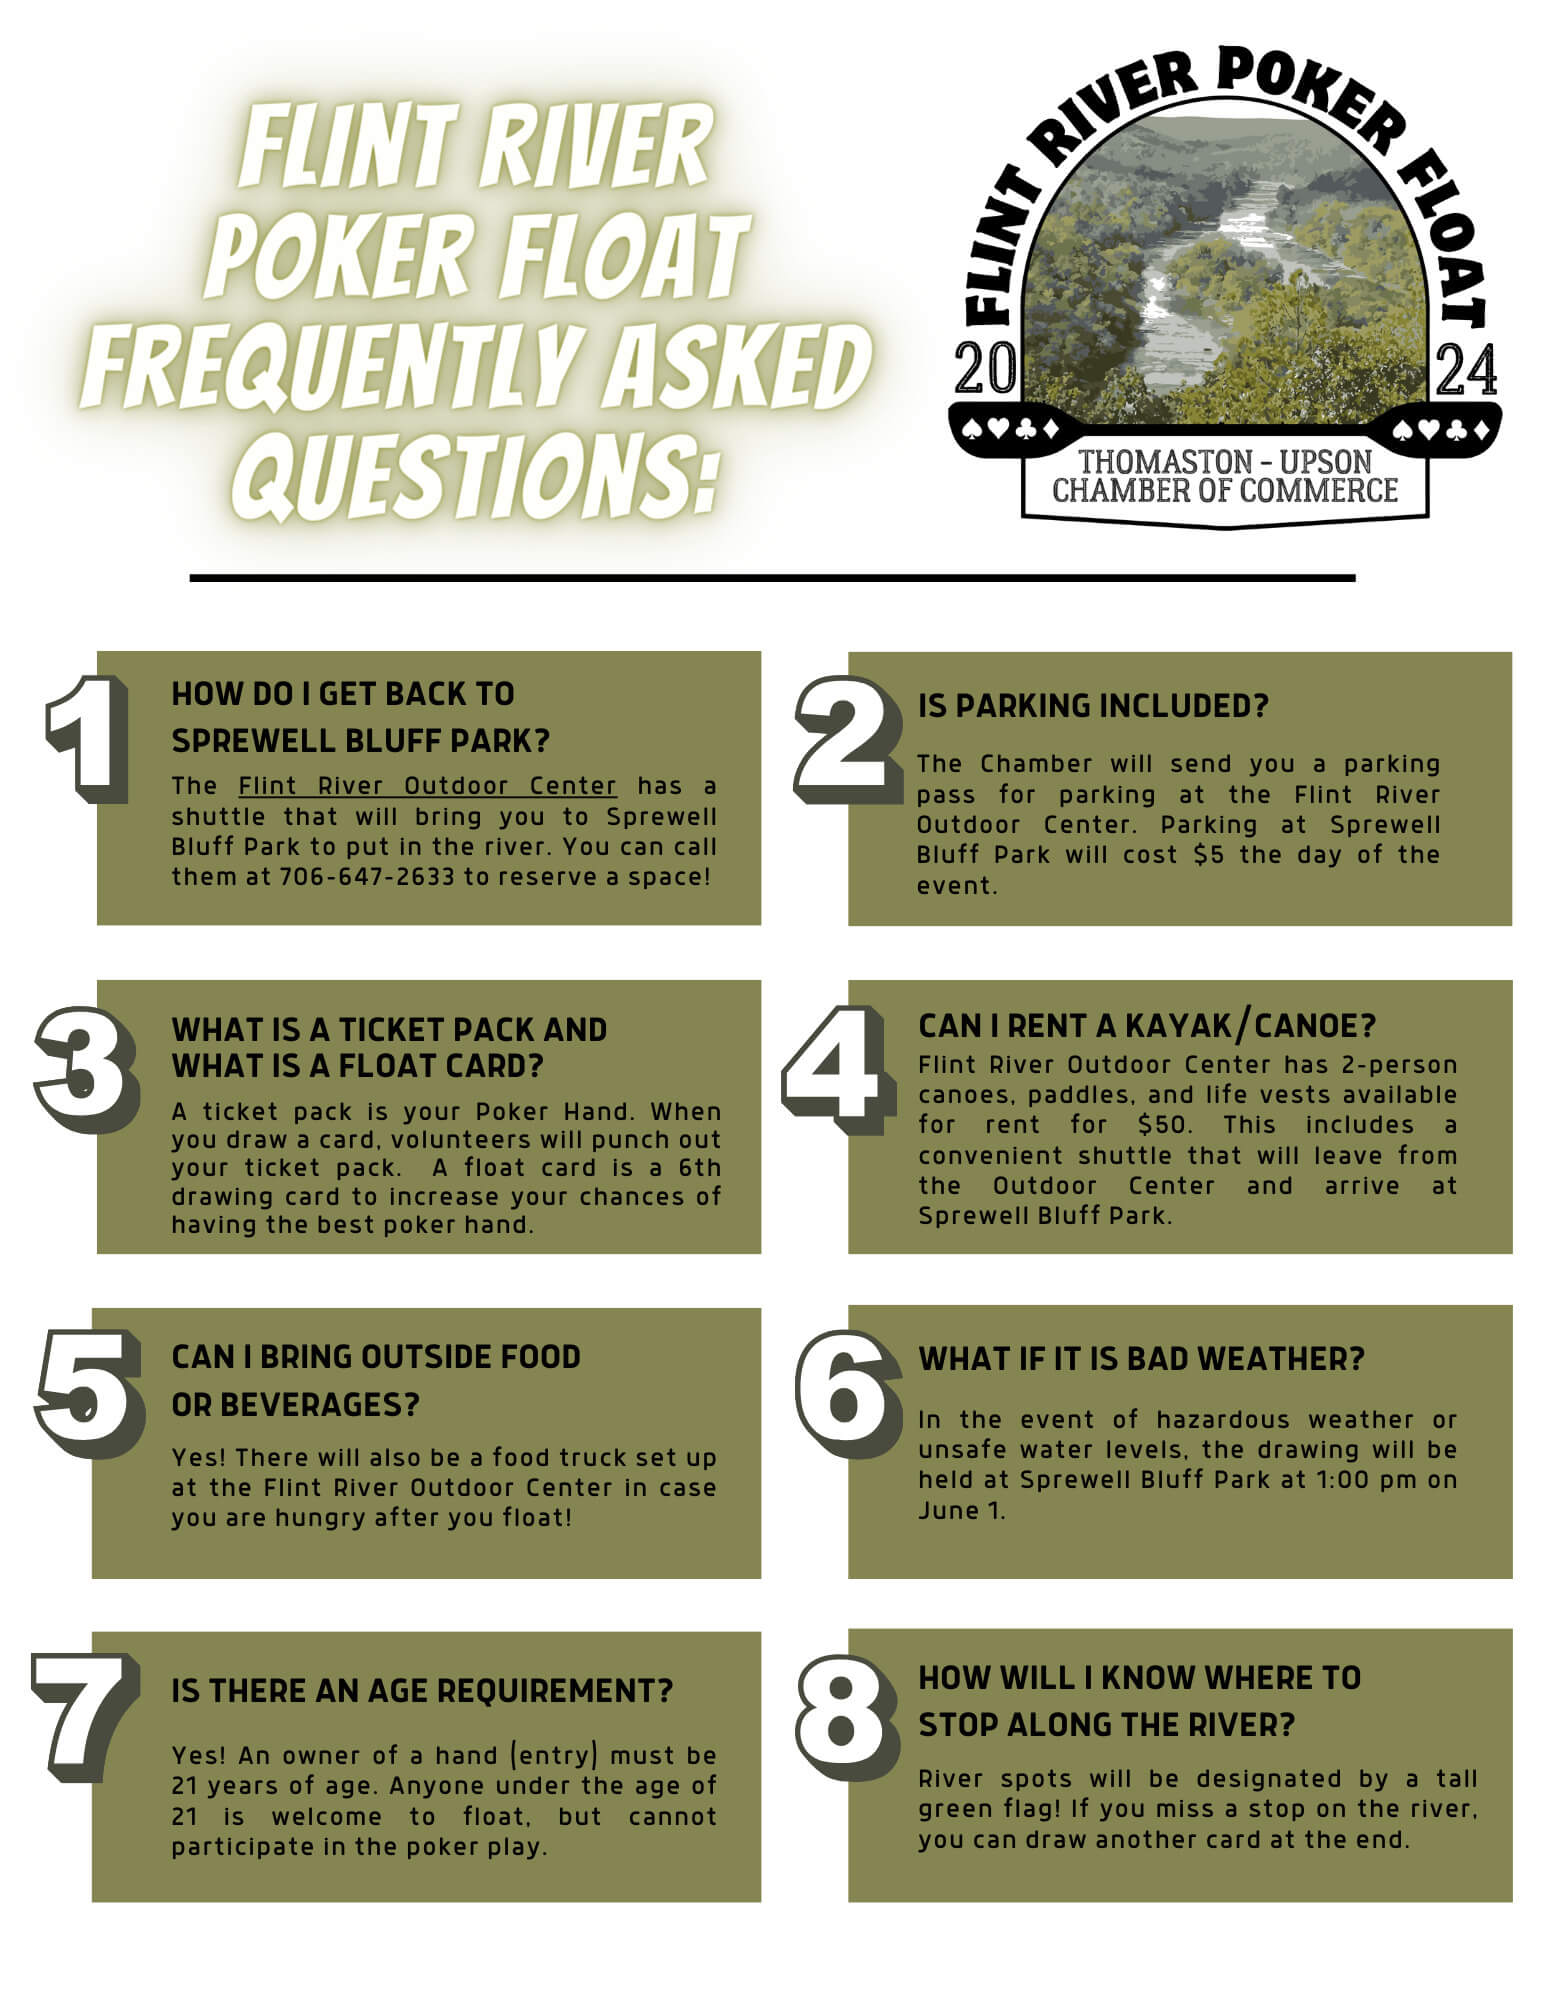 Frequently Asked Questions Poker Float (1)